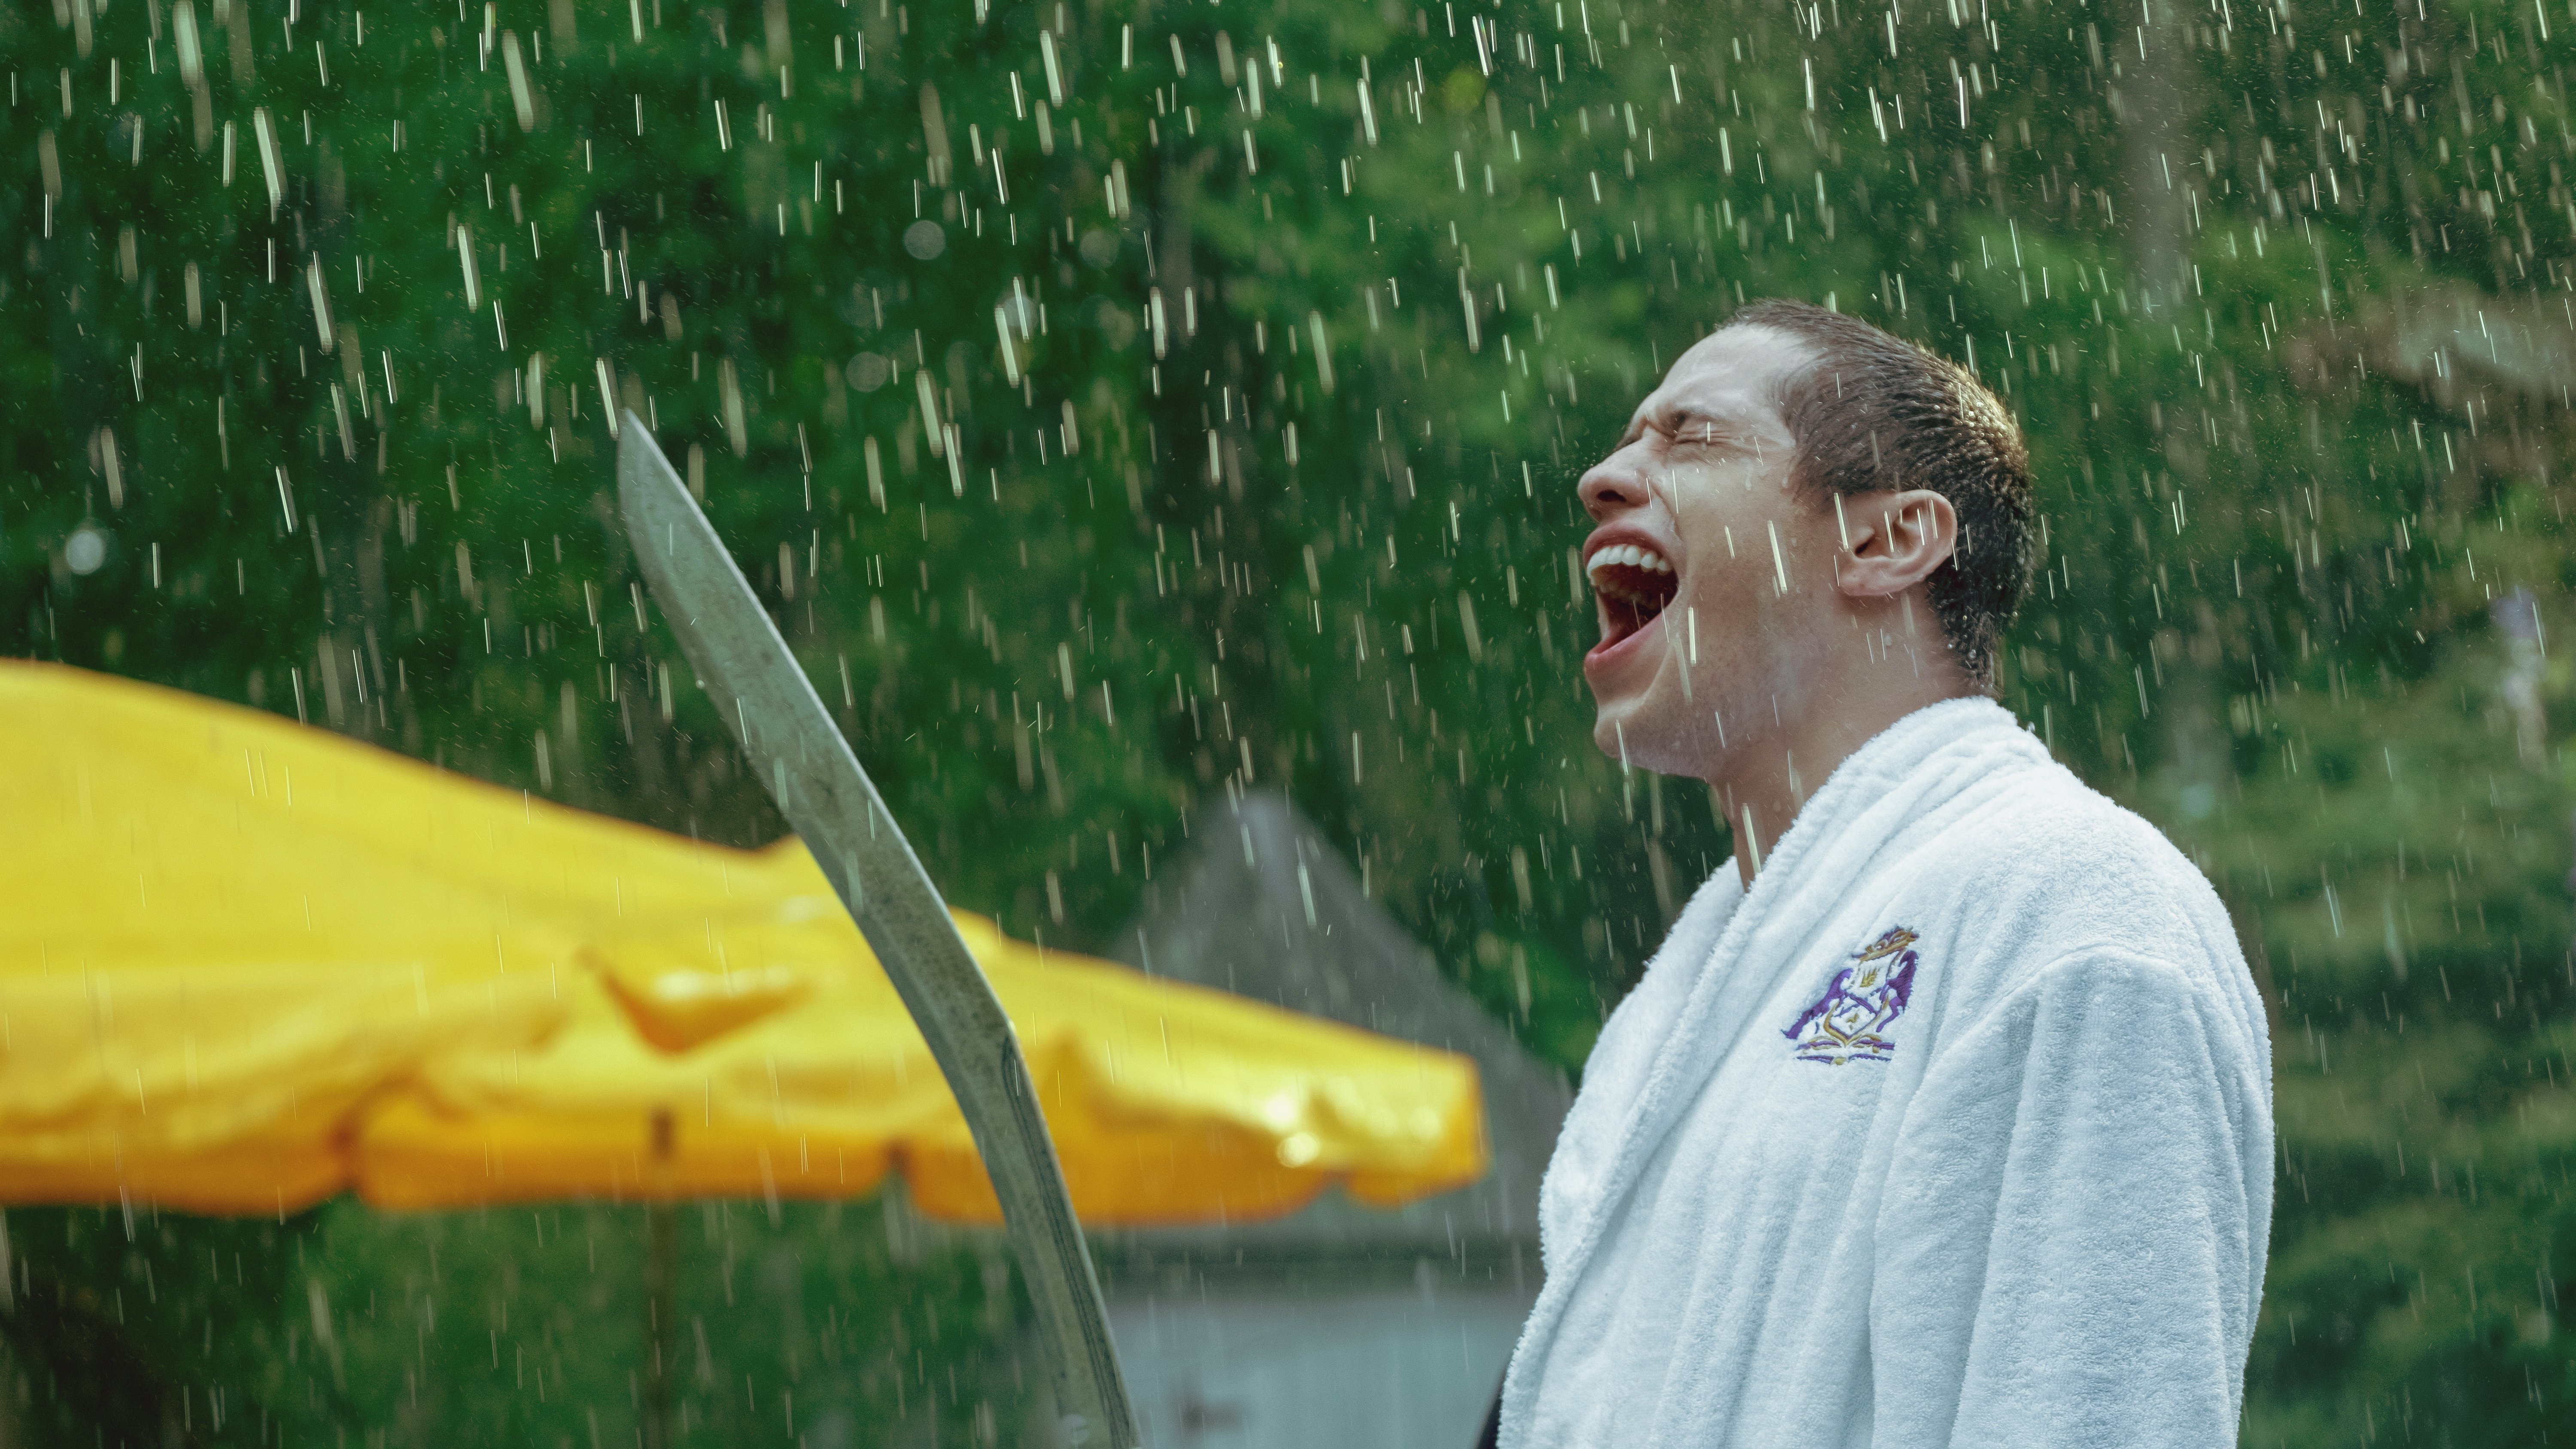 A man wearing a bathrobe and holding a sword stands outside screaming into the rain.